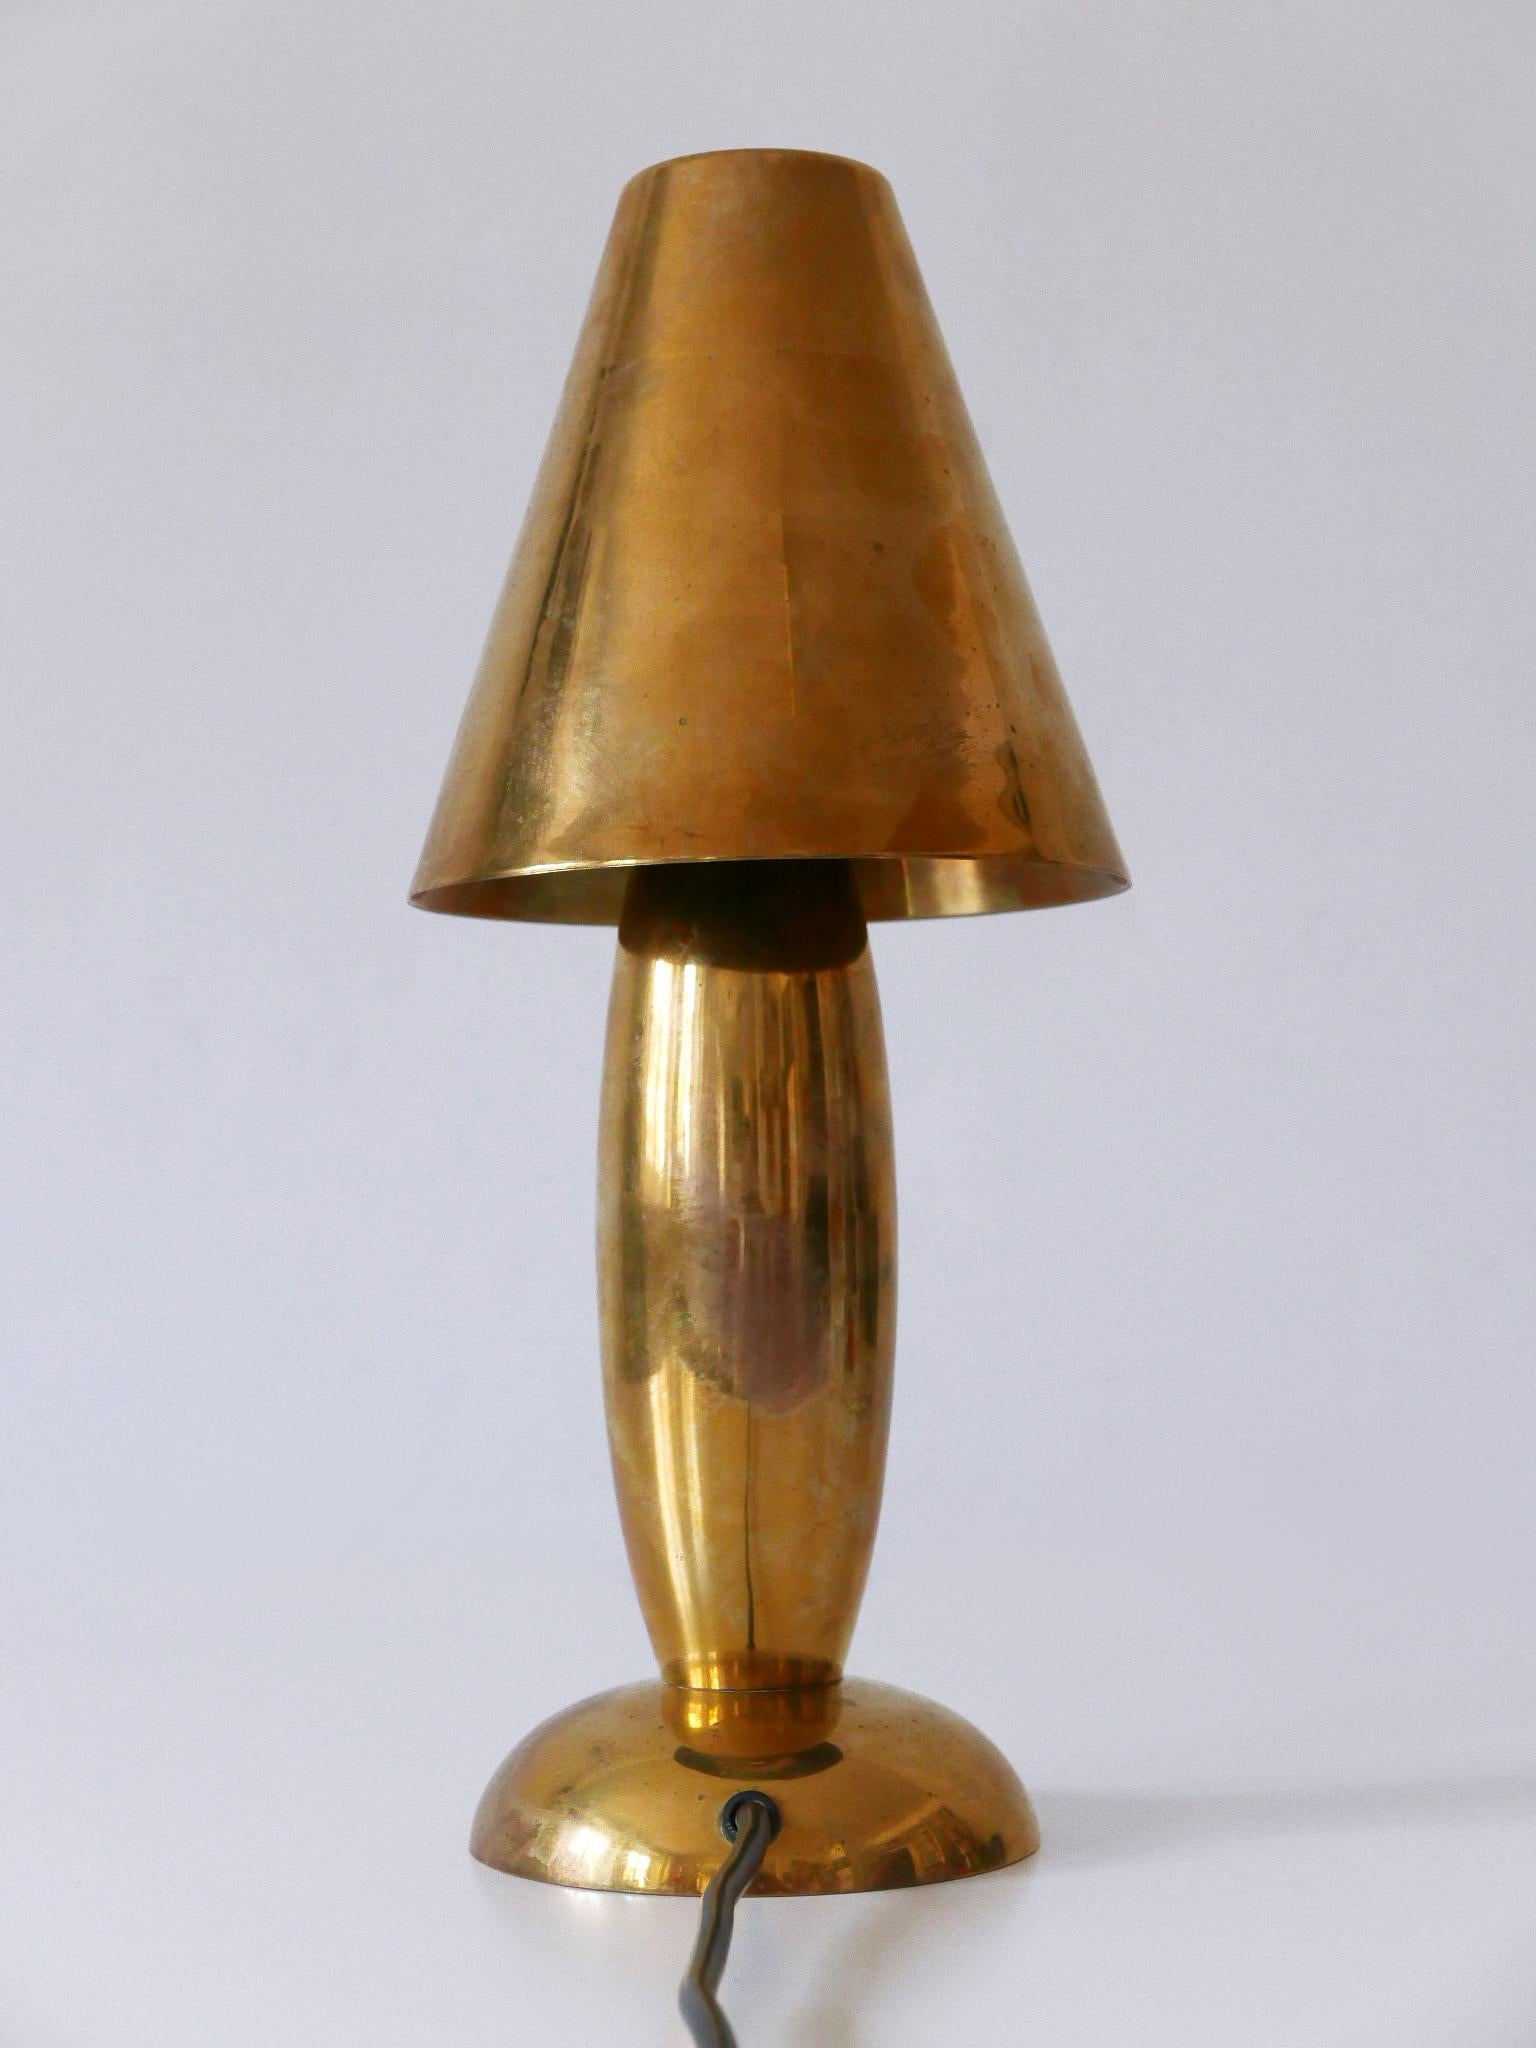 Rare & Lovely Mid-Century Modern Brass Side Table Lamp by Lambert Germany 1970s For Sale 11